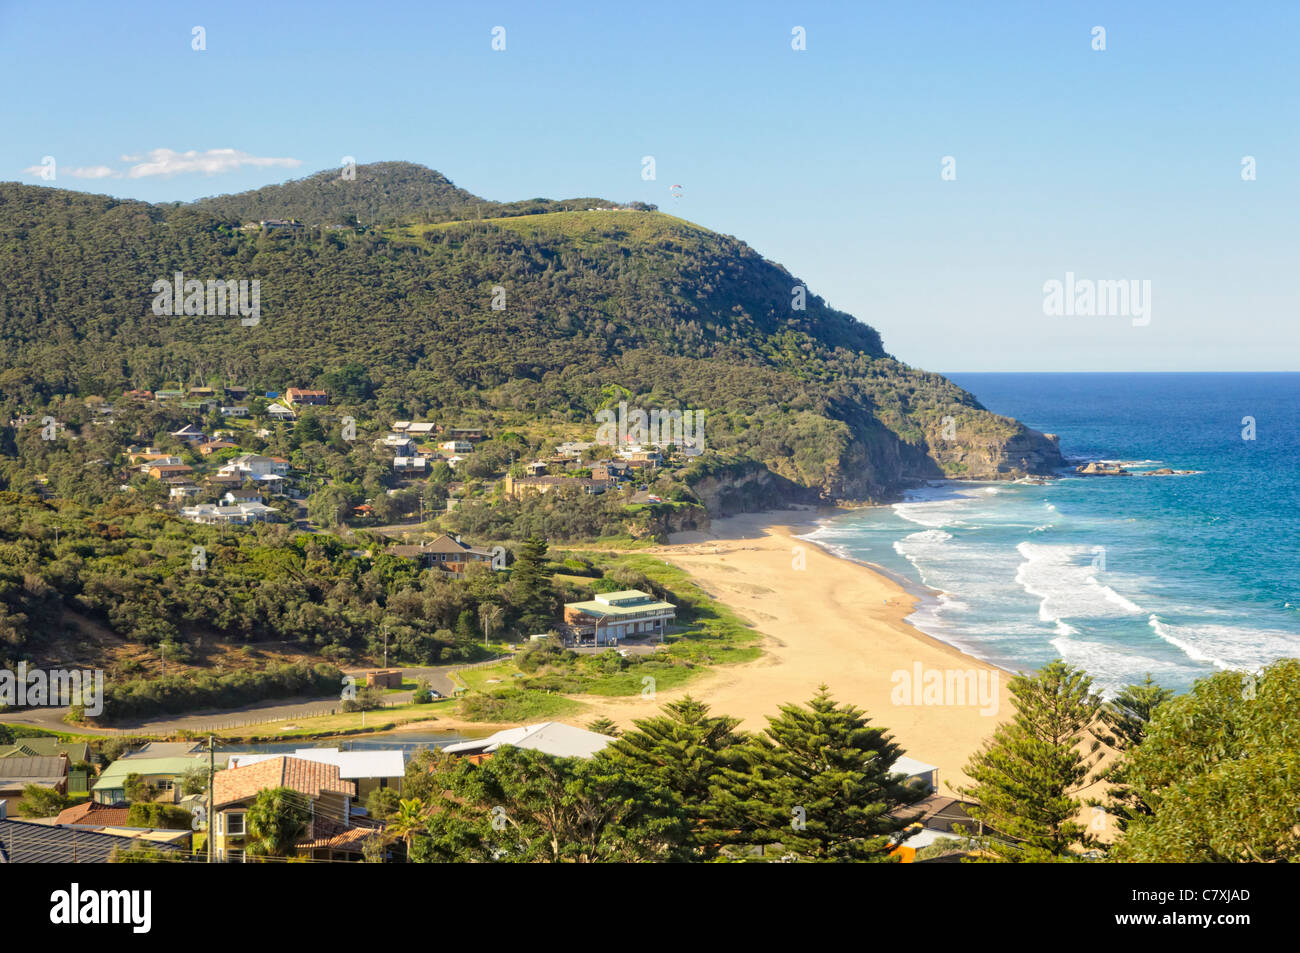 Small town next to an idyllic rural surf beach in a sheltered bay between forested hills. Stock Photo